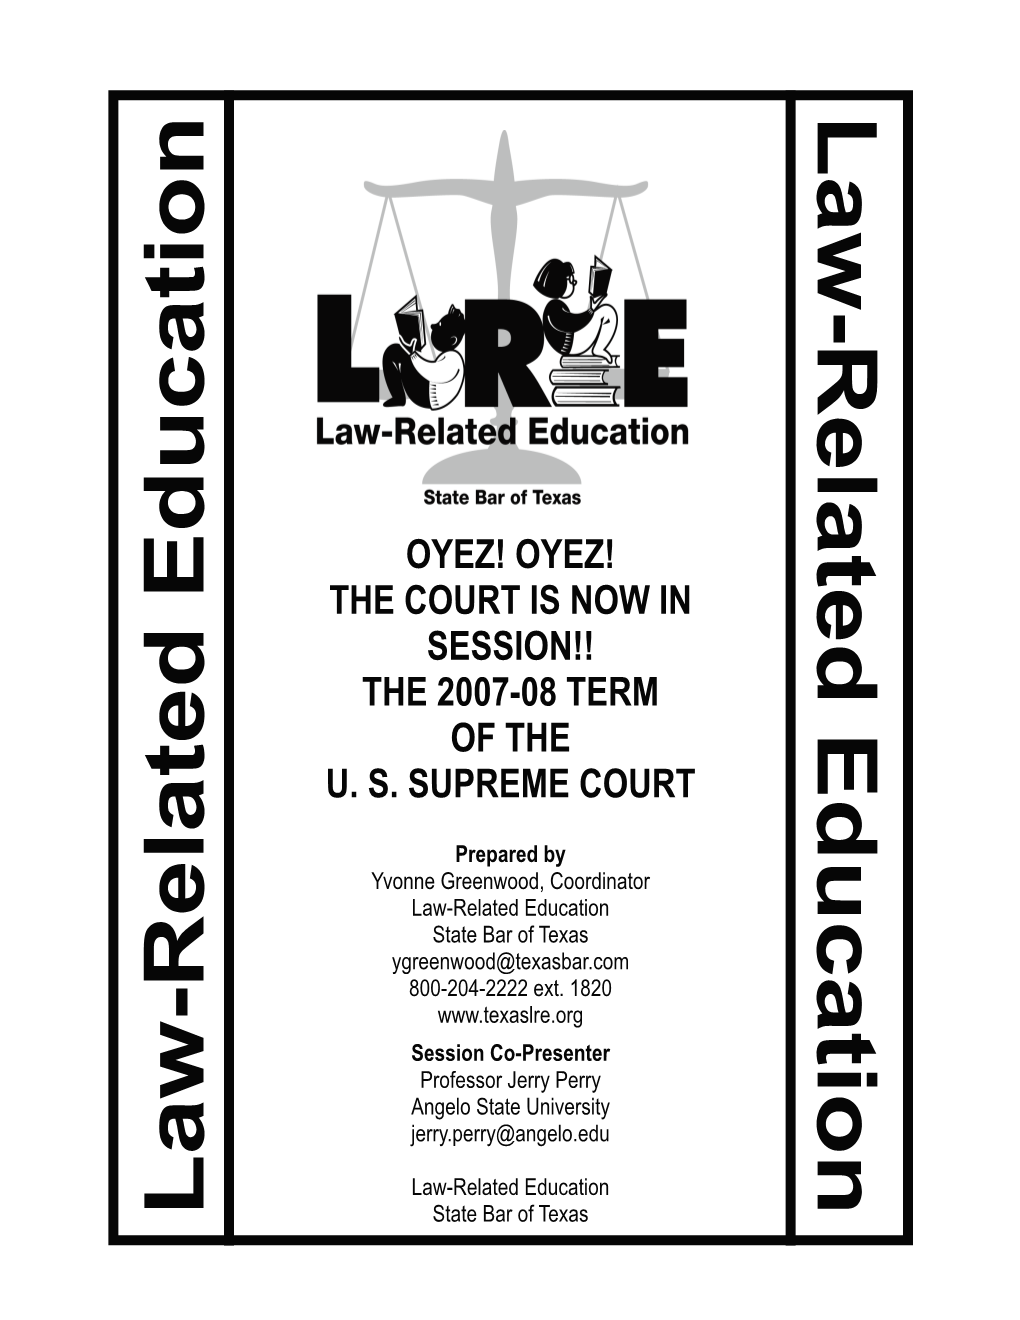 Oyez! Oyez! the Court Is Now in Session!! the 2007-08 Term of the U